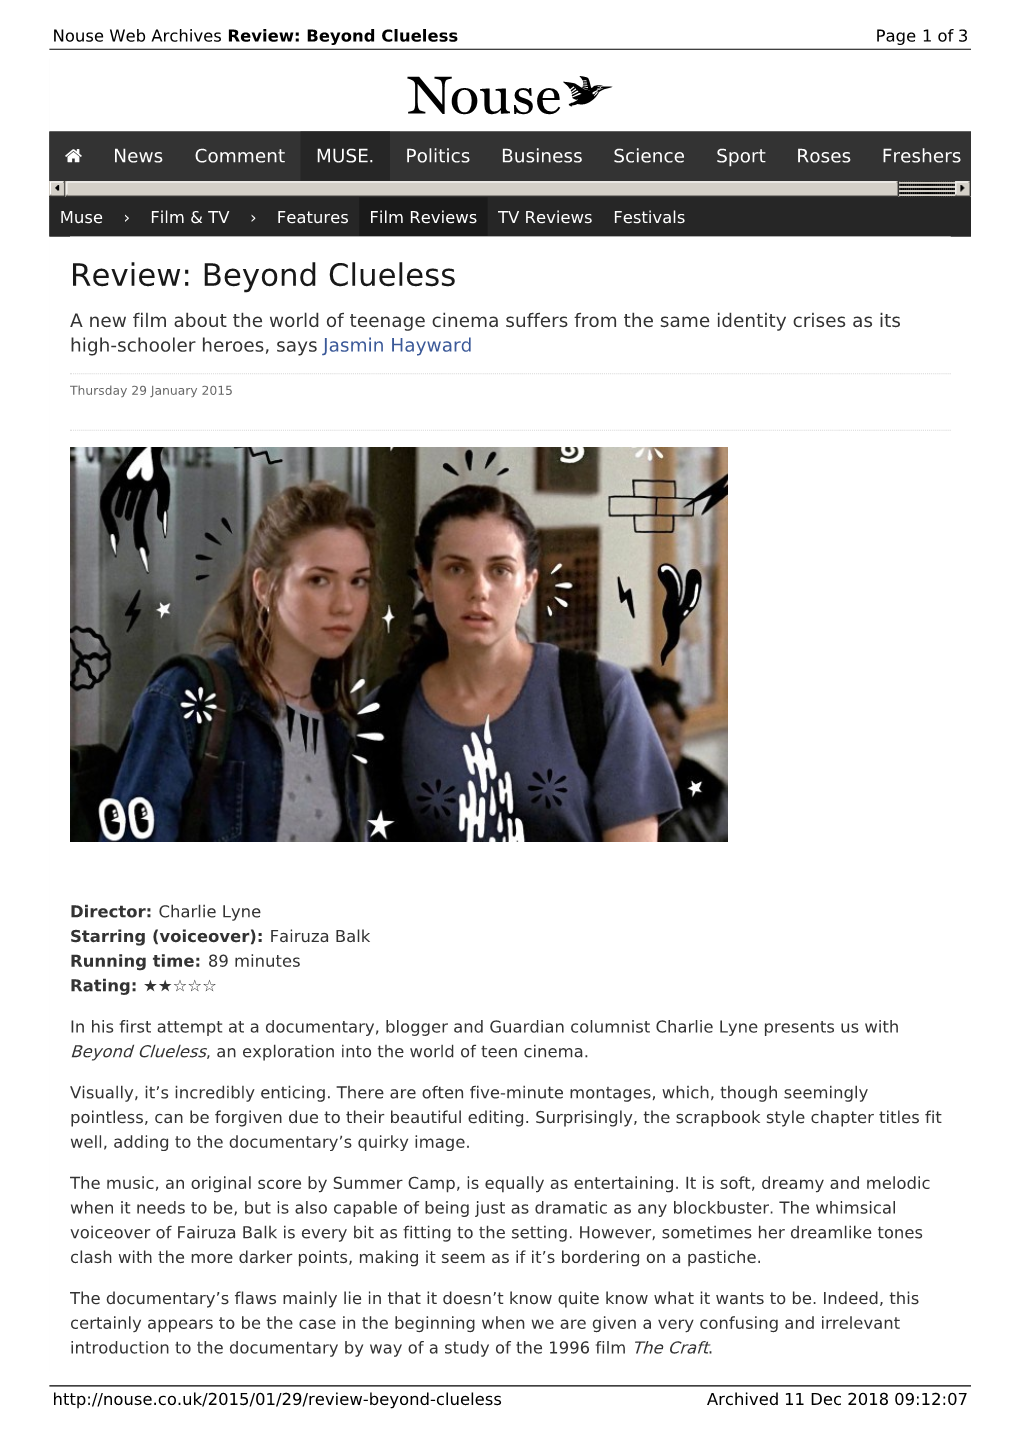 Review: Beyond Clueless | Nouse